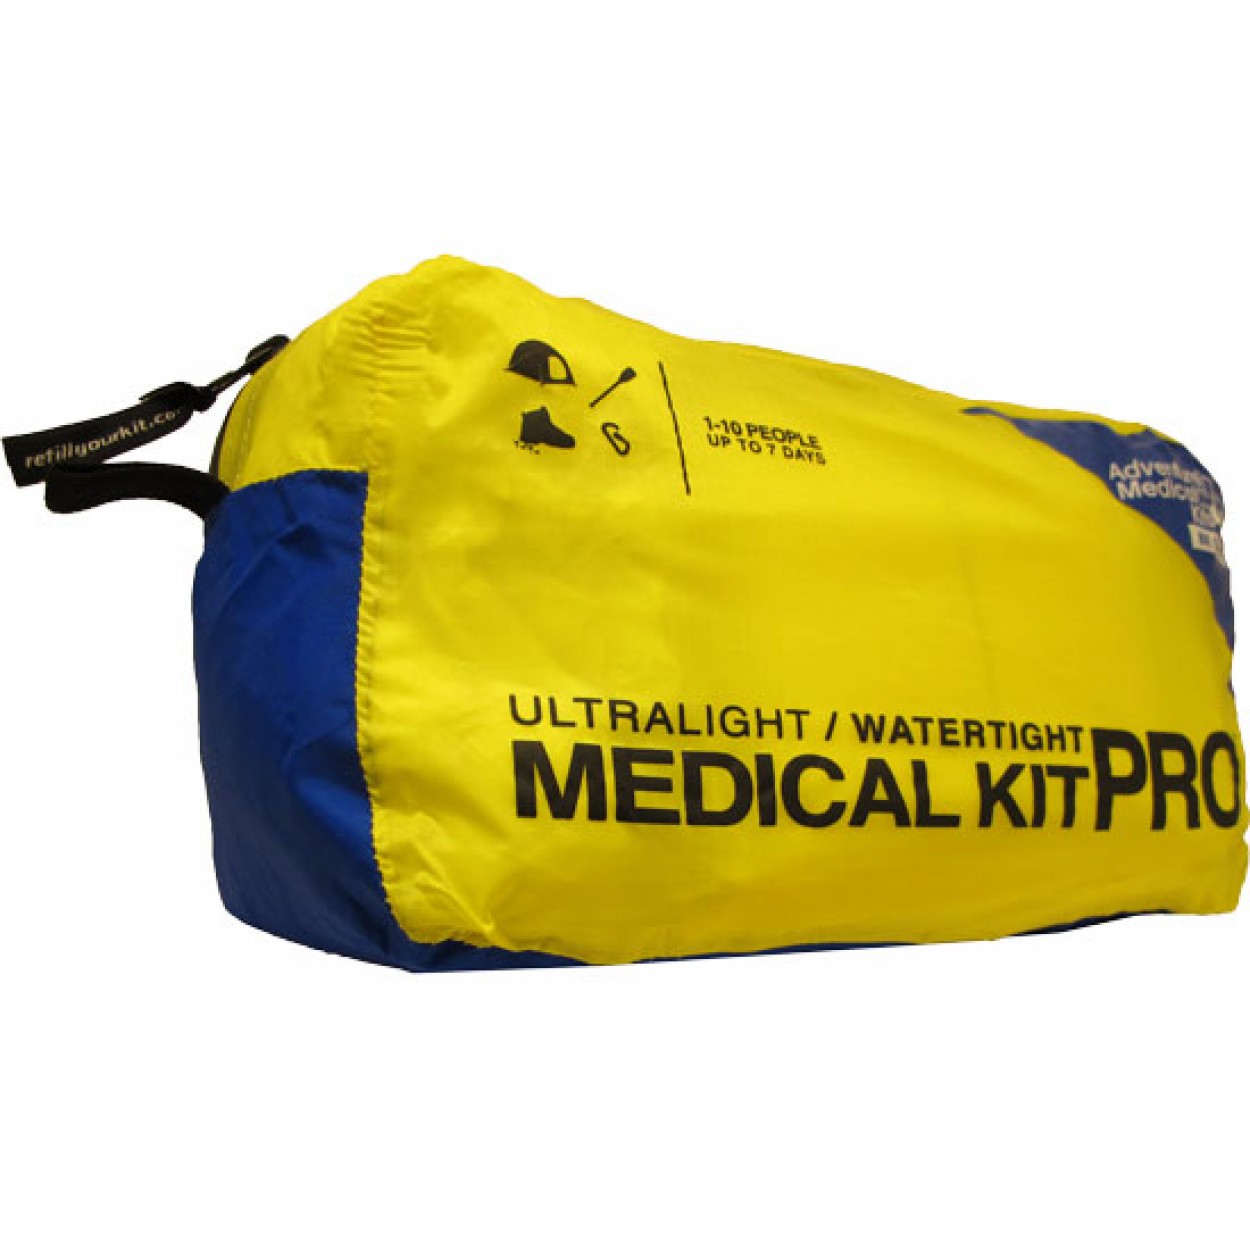 Professional Ultralight / Waterproof Pro First Aid Kit, by Adventure Medical Kits